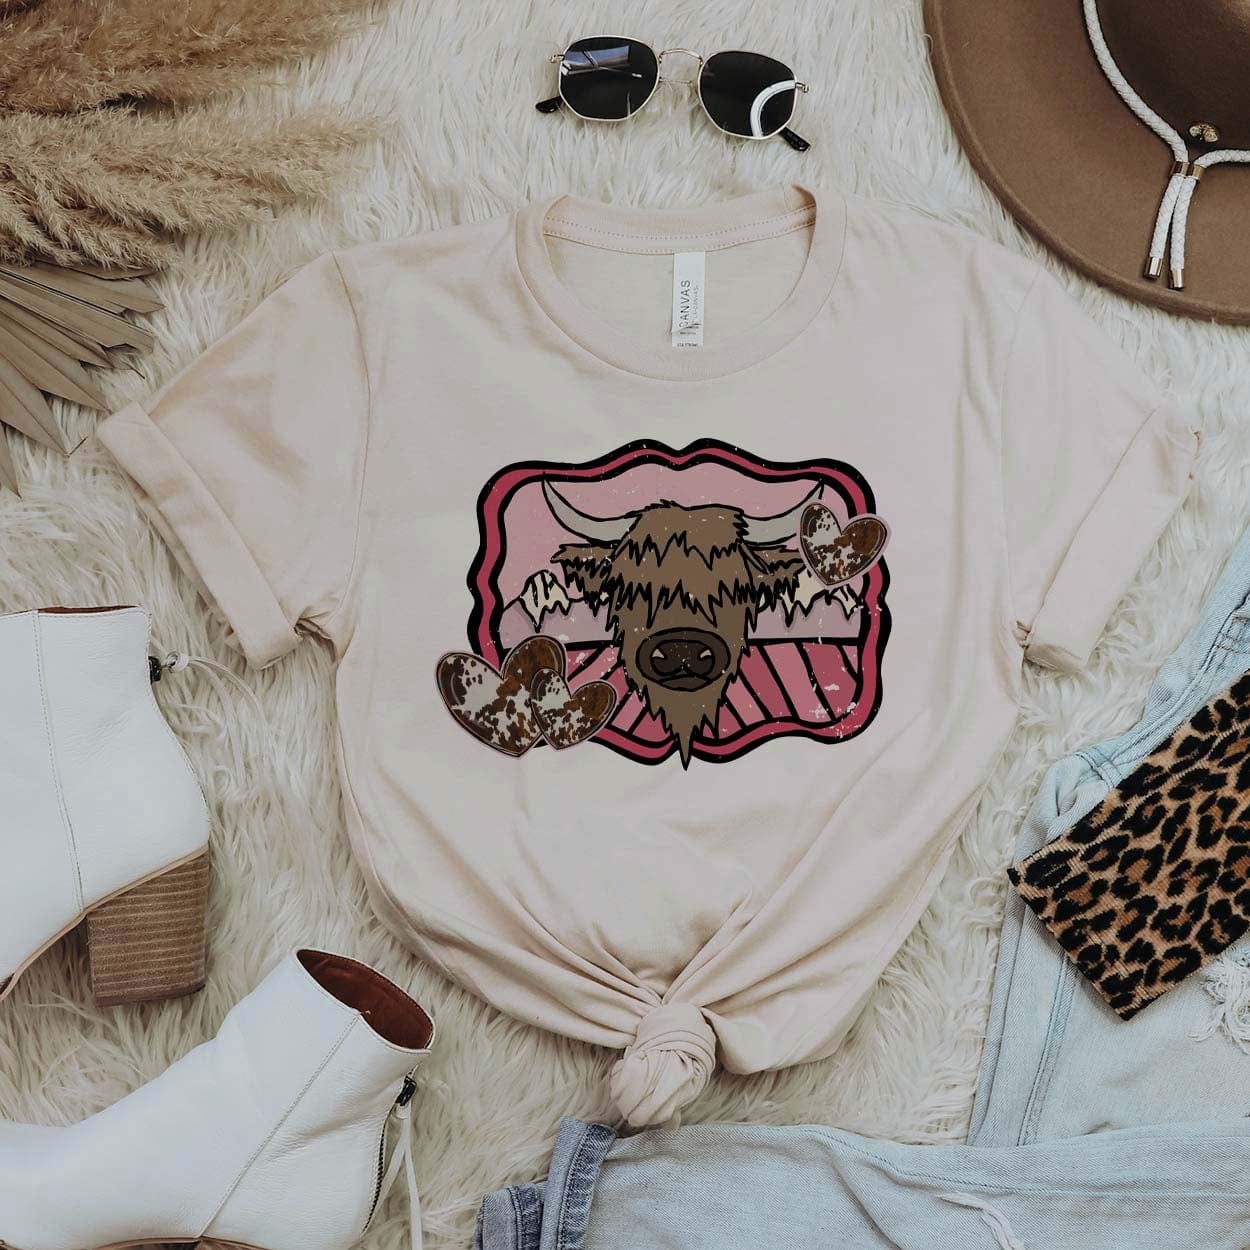 An ivory tee shirt that is knotted in the front and sleeves cuffed. Tee shirt has a highlander cow head drawn on a mountain background with pink detailing and cow print hearts. Tee shirt is pictured on fur background with white booties, light wash jeans, sunglasses, and a brown hat.